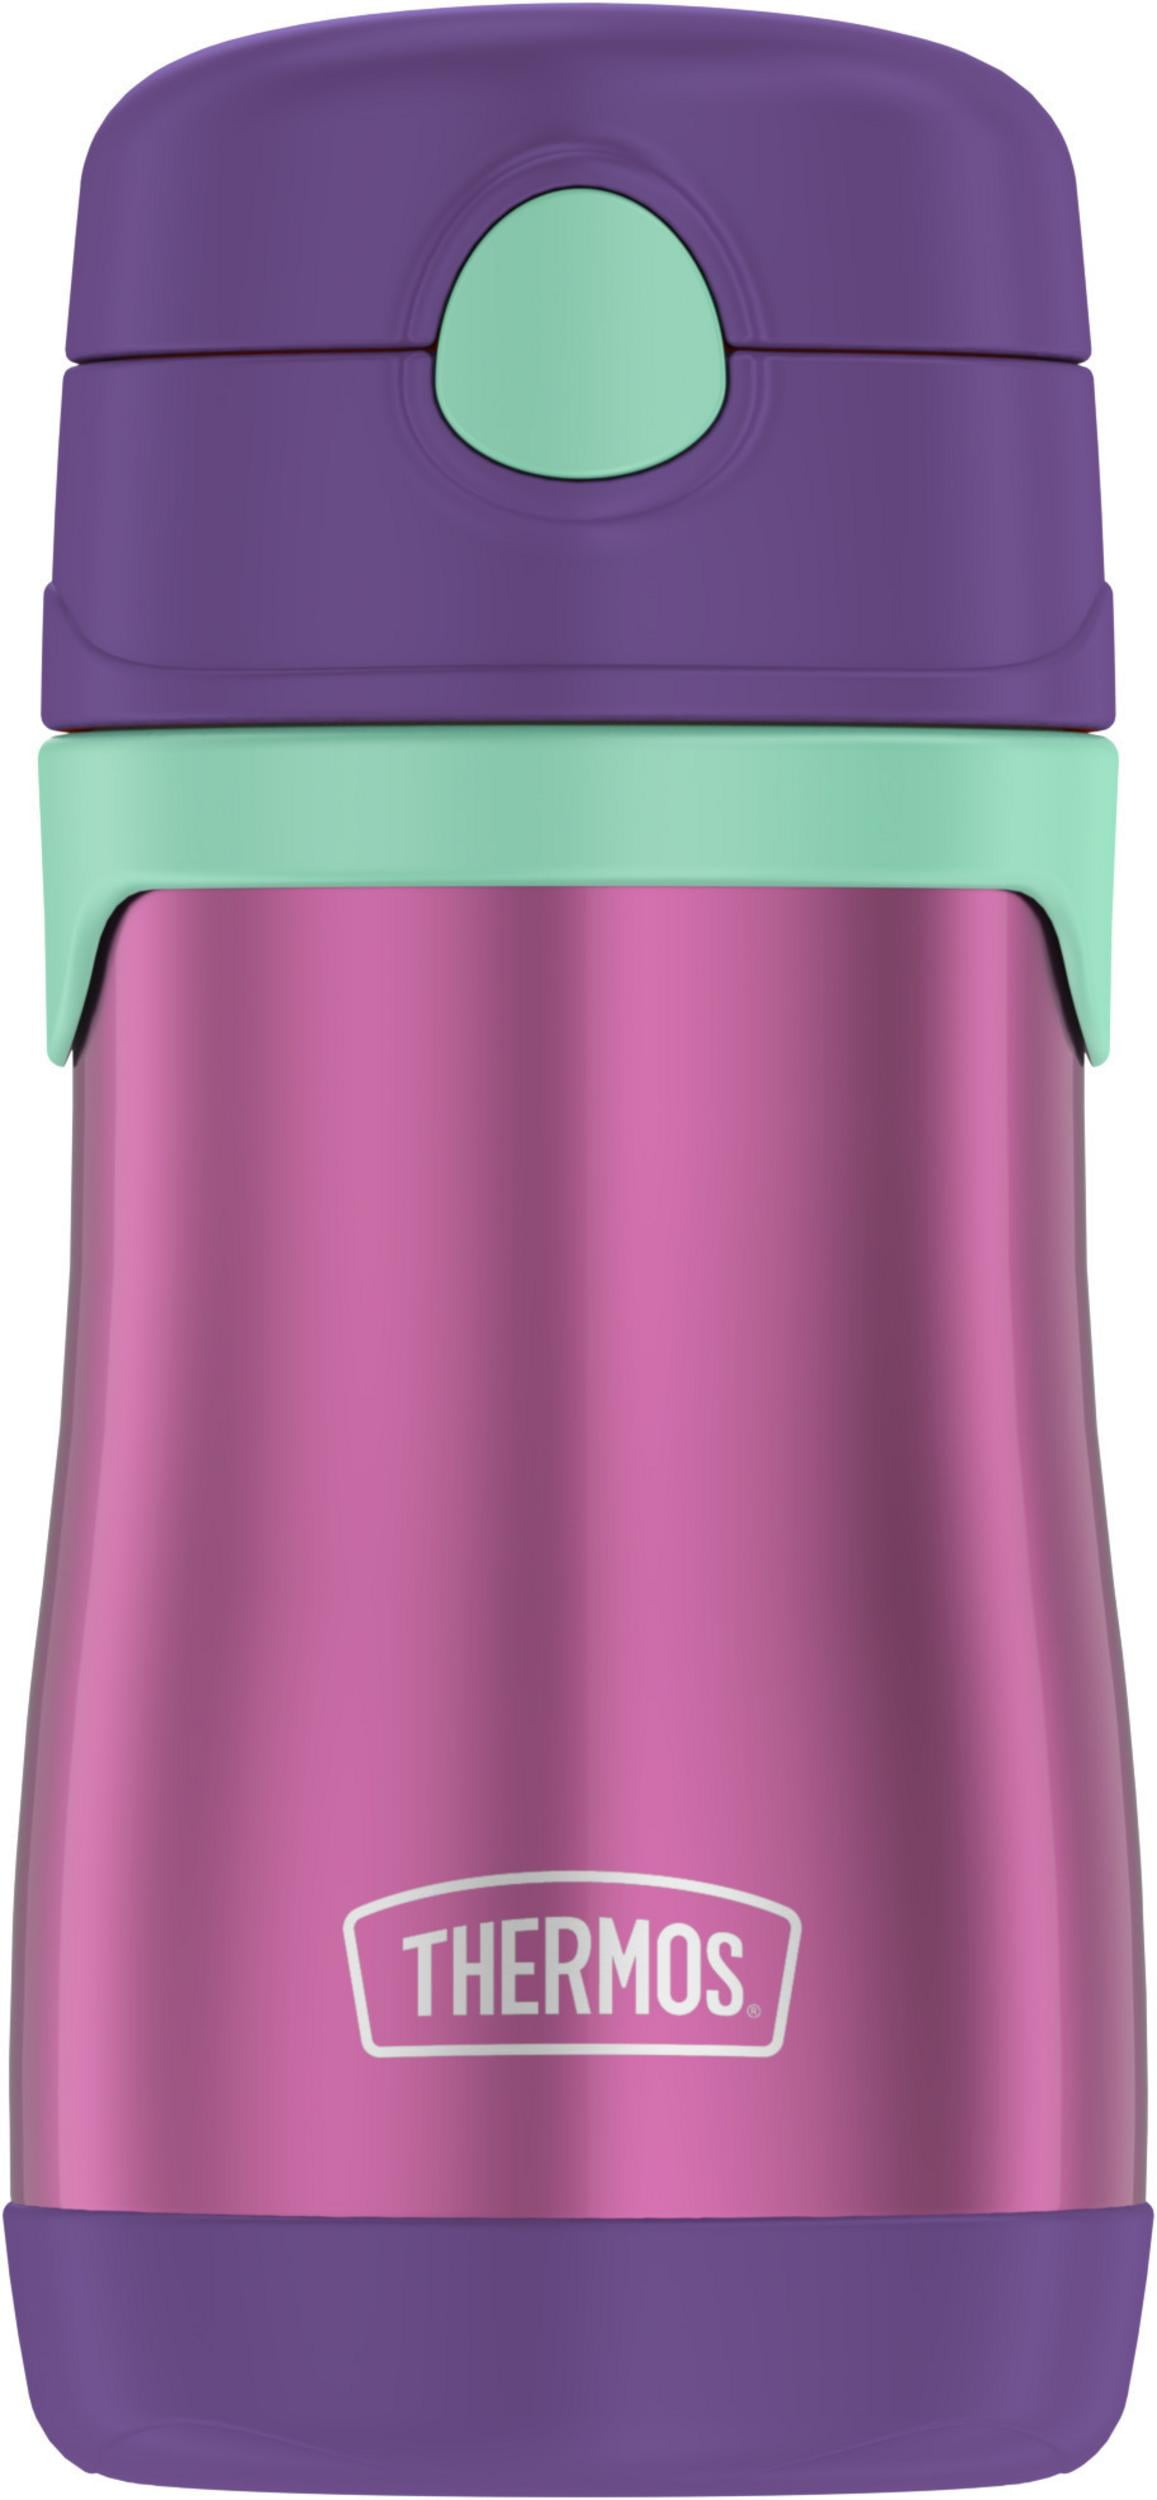 POTATO Baby Thermos Cup Water Bottle for Kids Stainless Steel Sippy Cup  with 3 Kinds of Lids,Keeps Cold for 8 Hours 8 oz, Blue